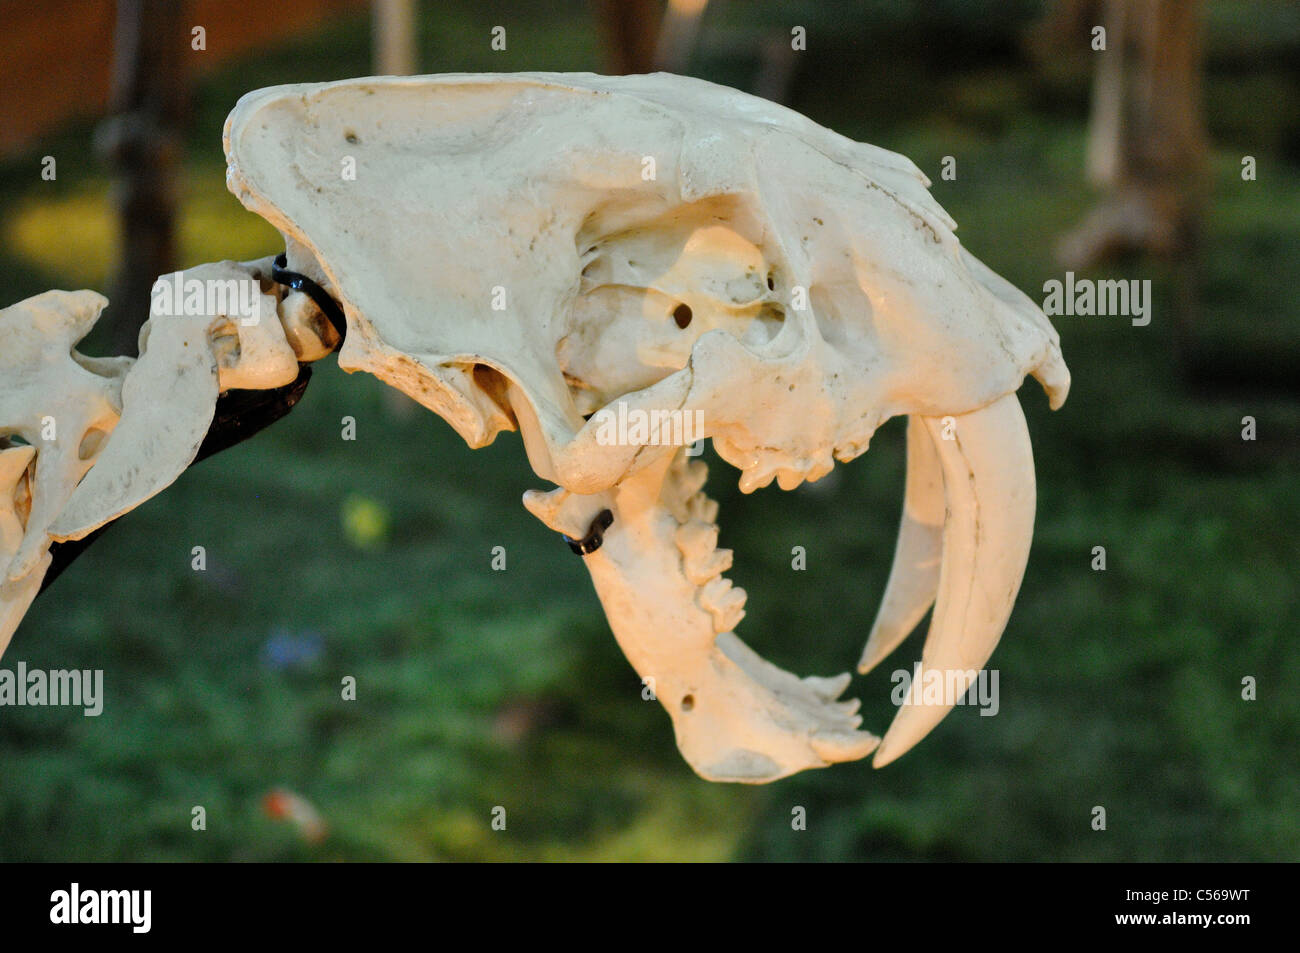 Skull of a saber-toothed tiger. Beijing, China. Stock Photo